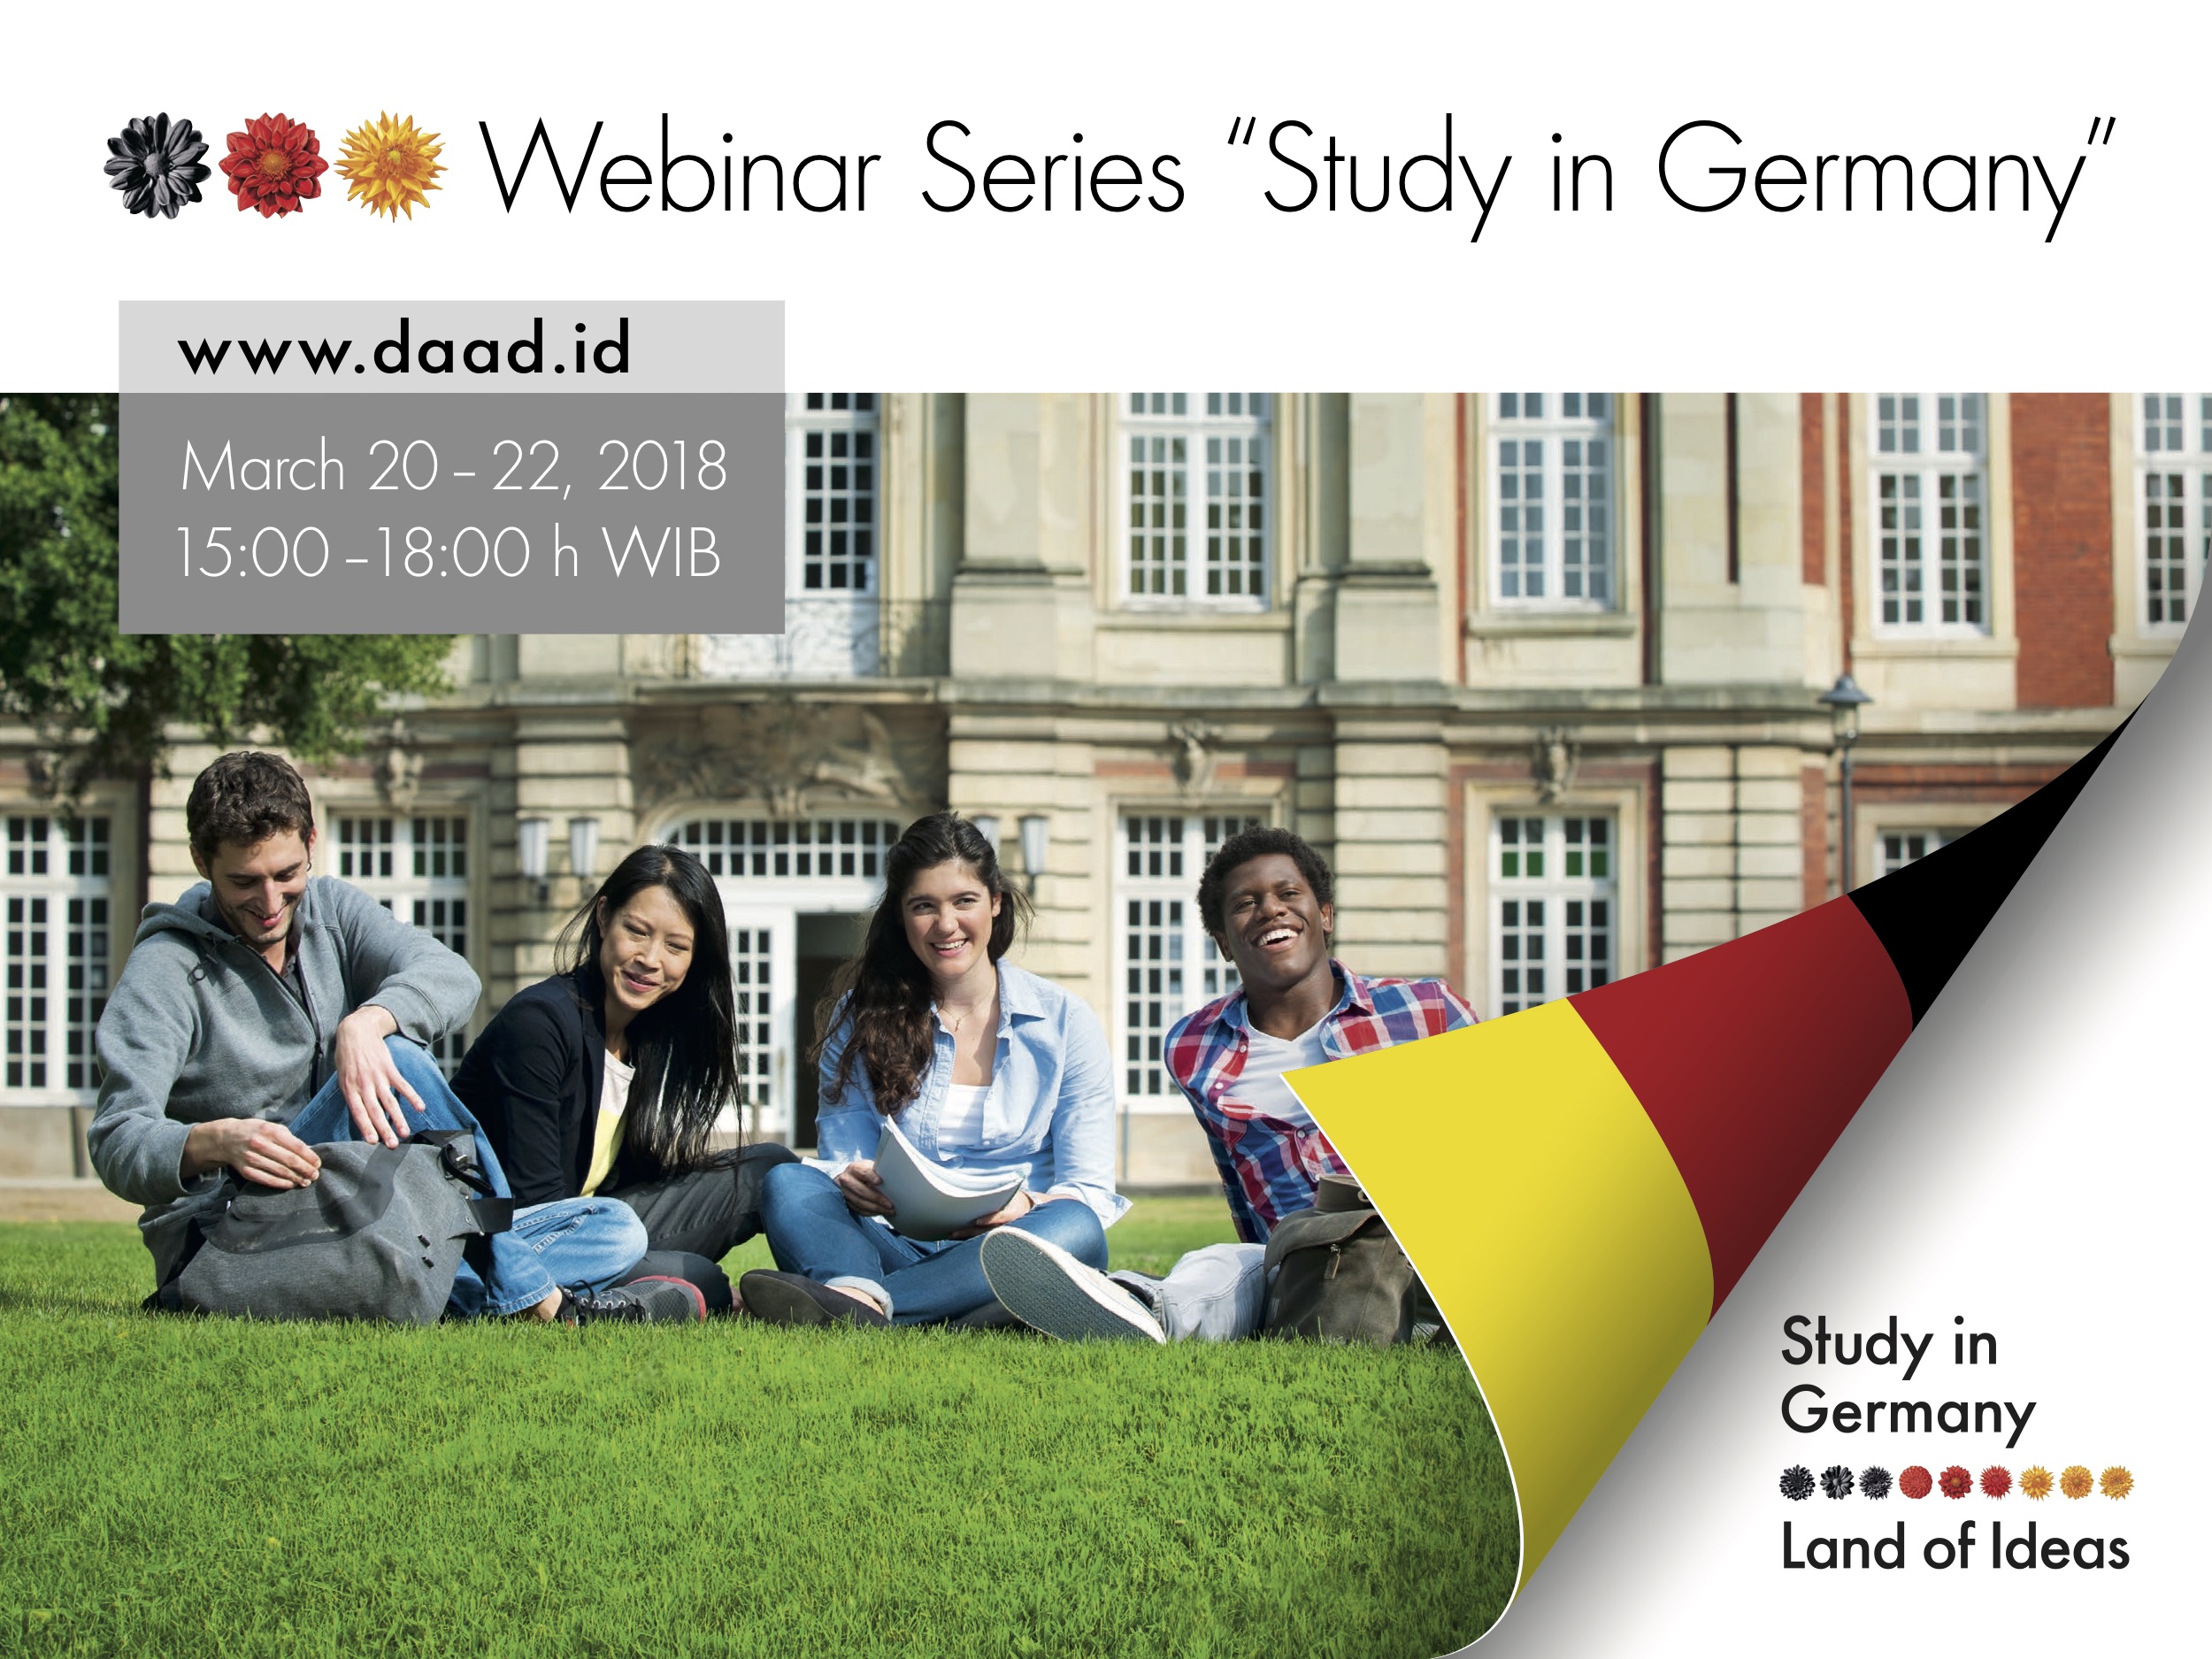 3 Reasons to Join the Webinar Series "Study in Germany"